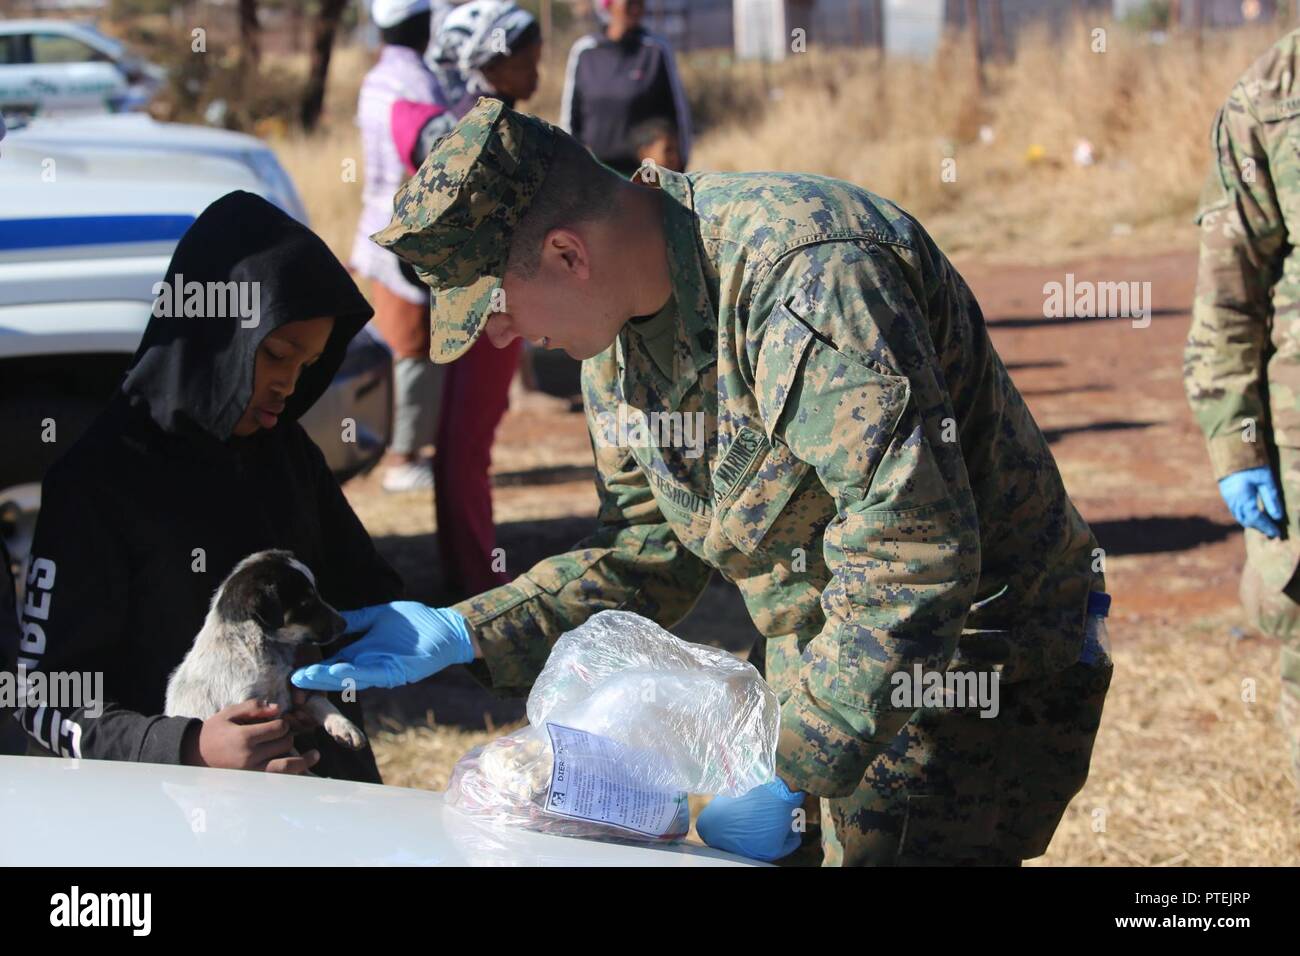 Sgt. Alex Vanlieshout, 3rd Battalion, 25th Marines provides food for a puppy while locals wait for free veterinary care during Mandela Day as part of Exercise Shared Accord 17 (SA17) in Postmasburg, South Africa, July 18, 2017. Mandela Day commemorates the lifetime of service Nelson Mandela gave to South Africa and the world, taking place every year on his birthday, with this years theme being, “action against poverty.” Stock Photo